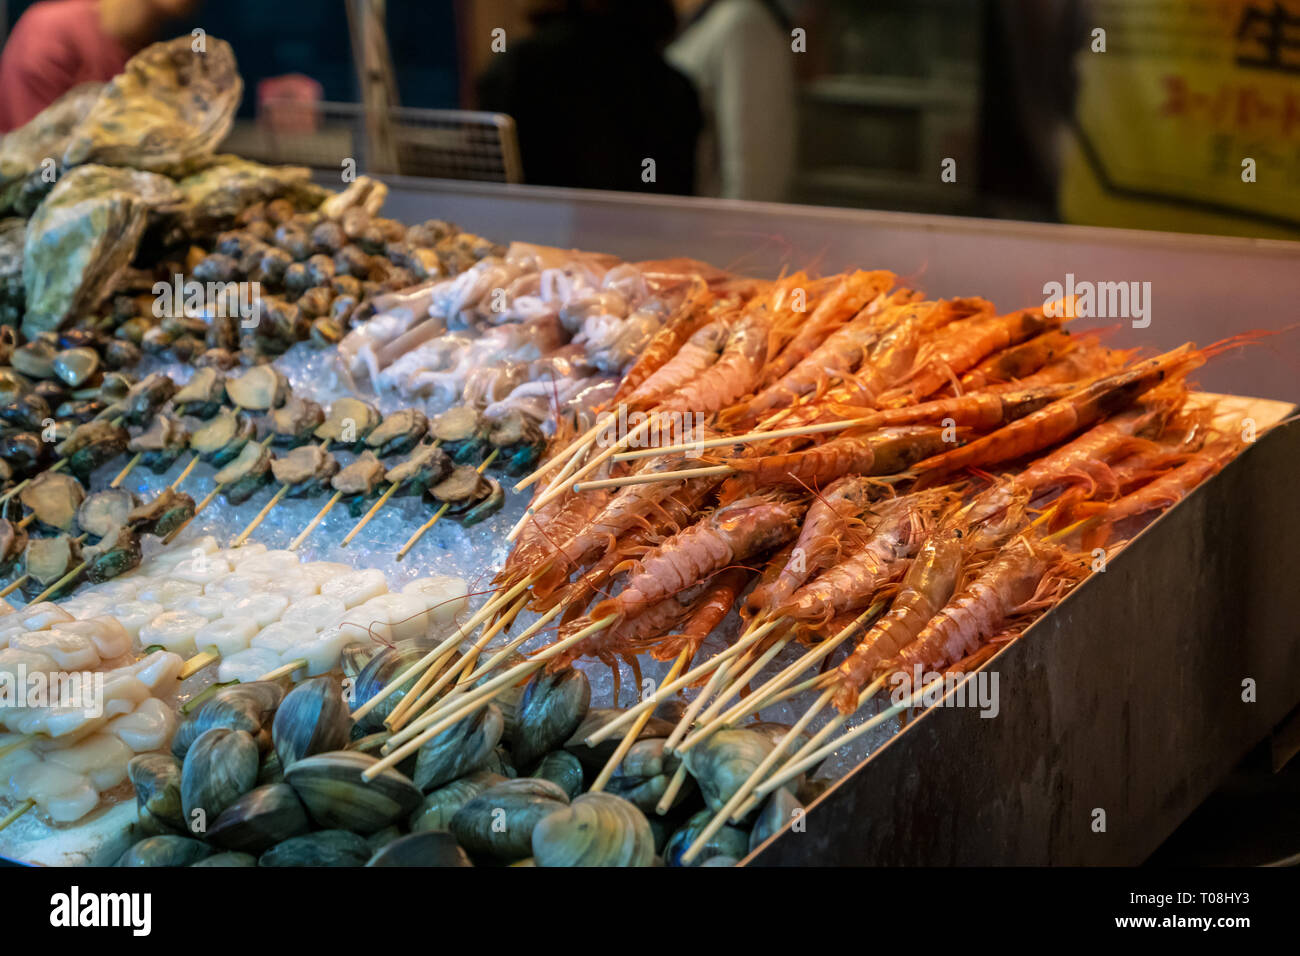 shrimps, oysters, scallops, shellfish and fresh seafood in street food stall in Asian night market Stock Photo